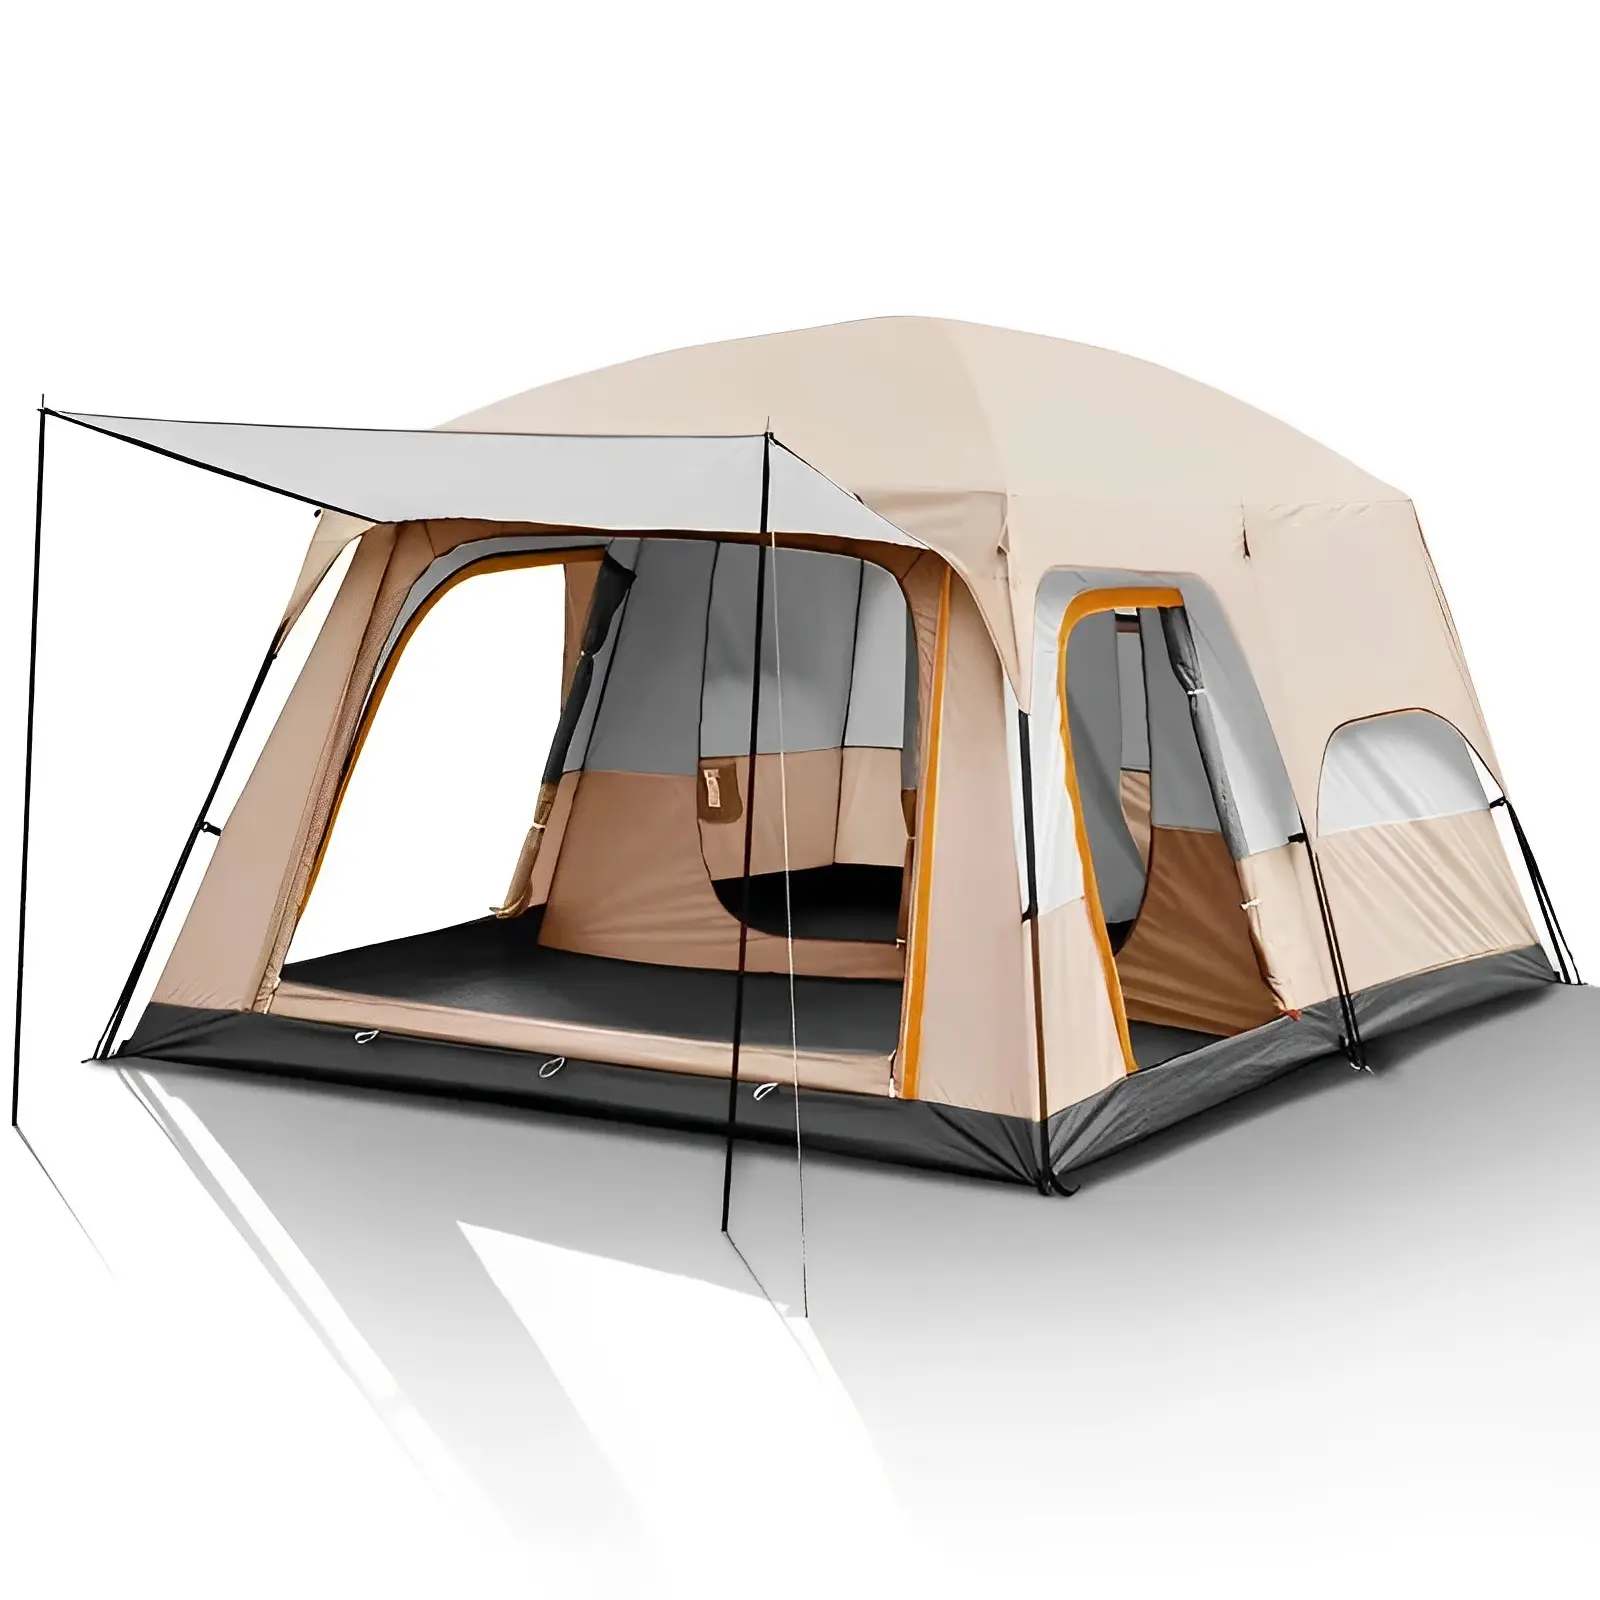 Big portable two room and one hall camping outdoor waterproof family camping tents